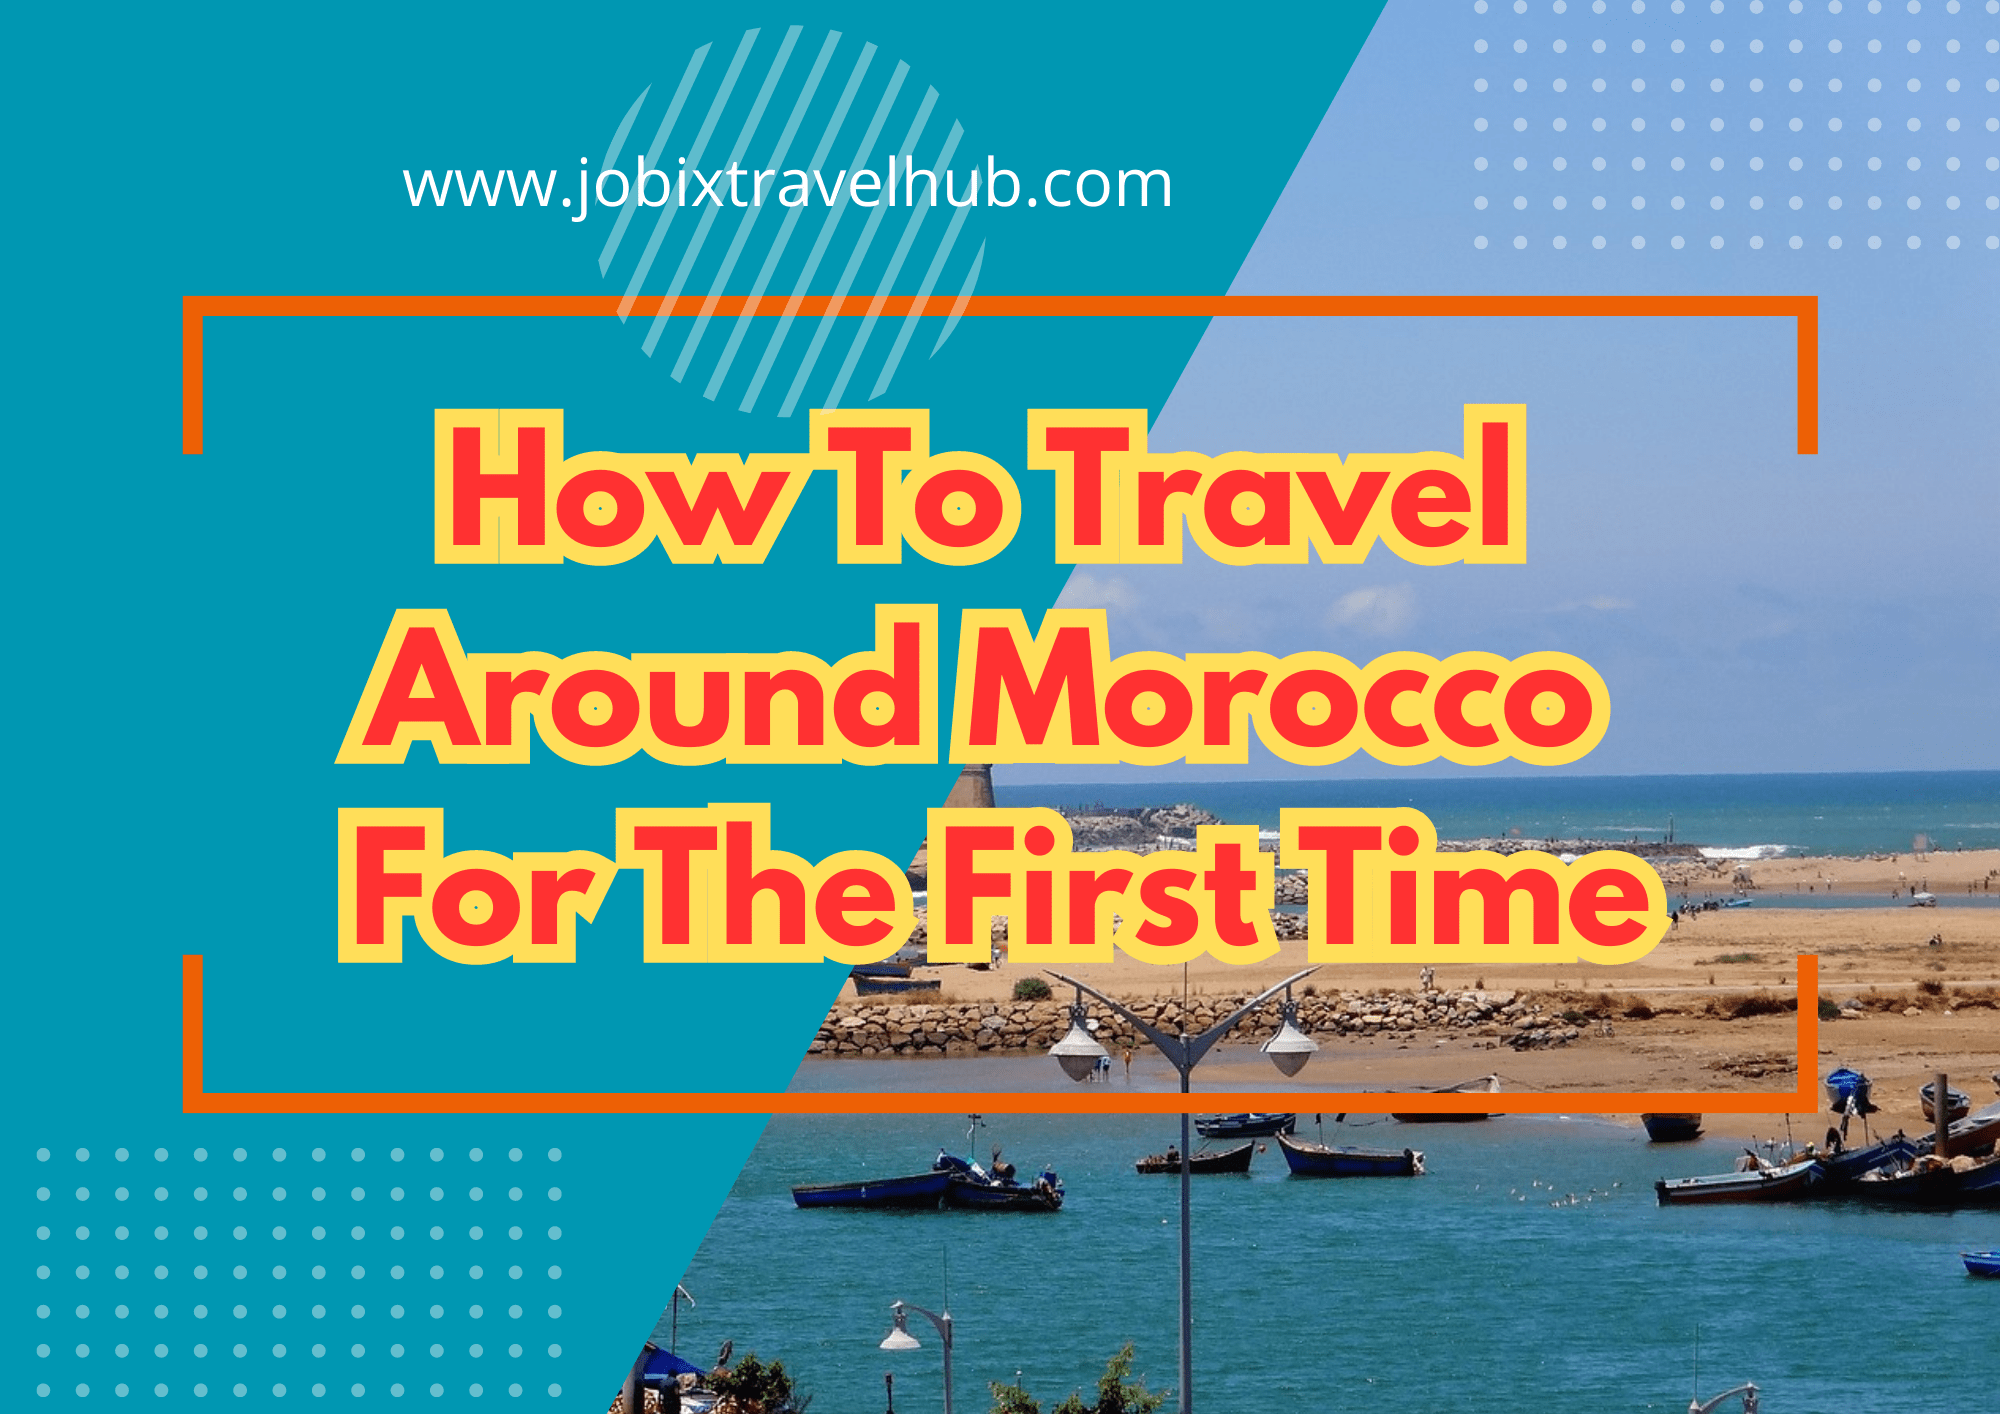 A Vacation in Morocco: How to travel around Morocco for the first time